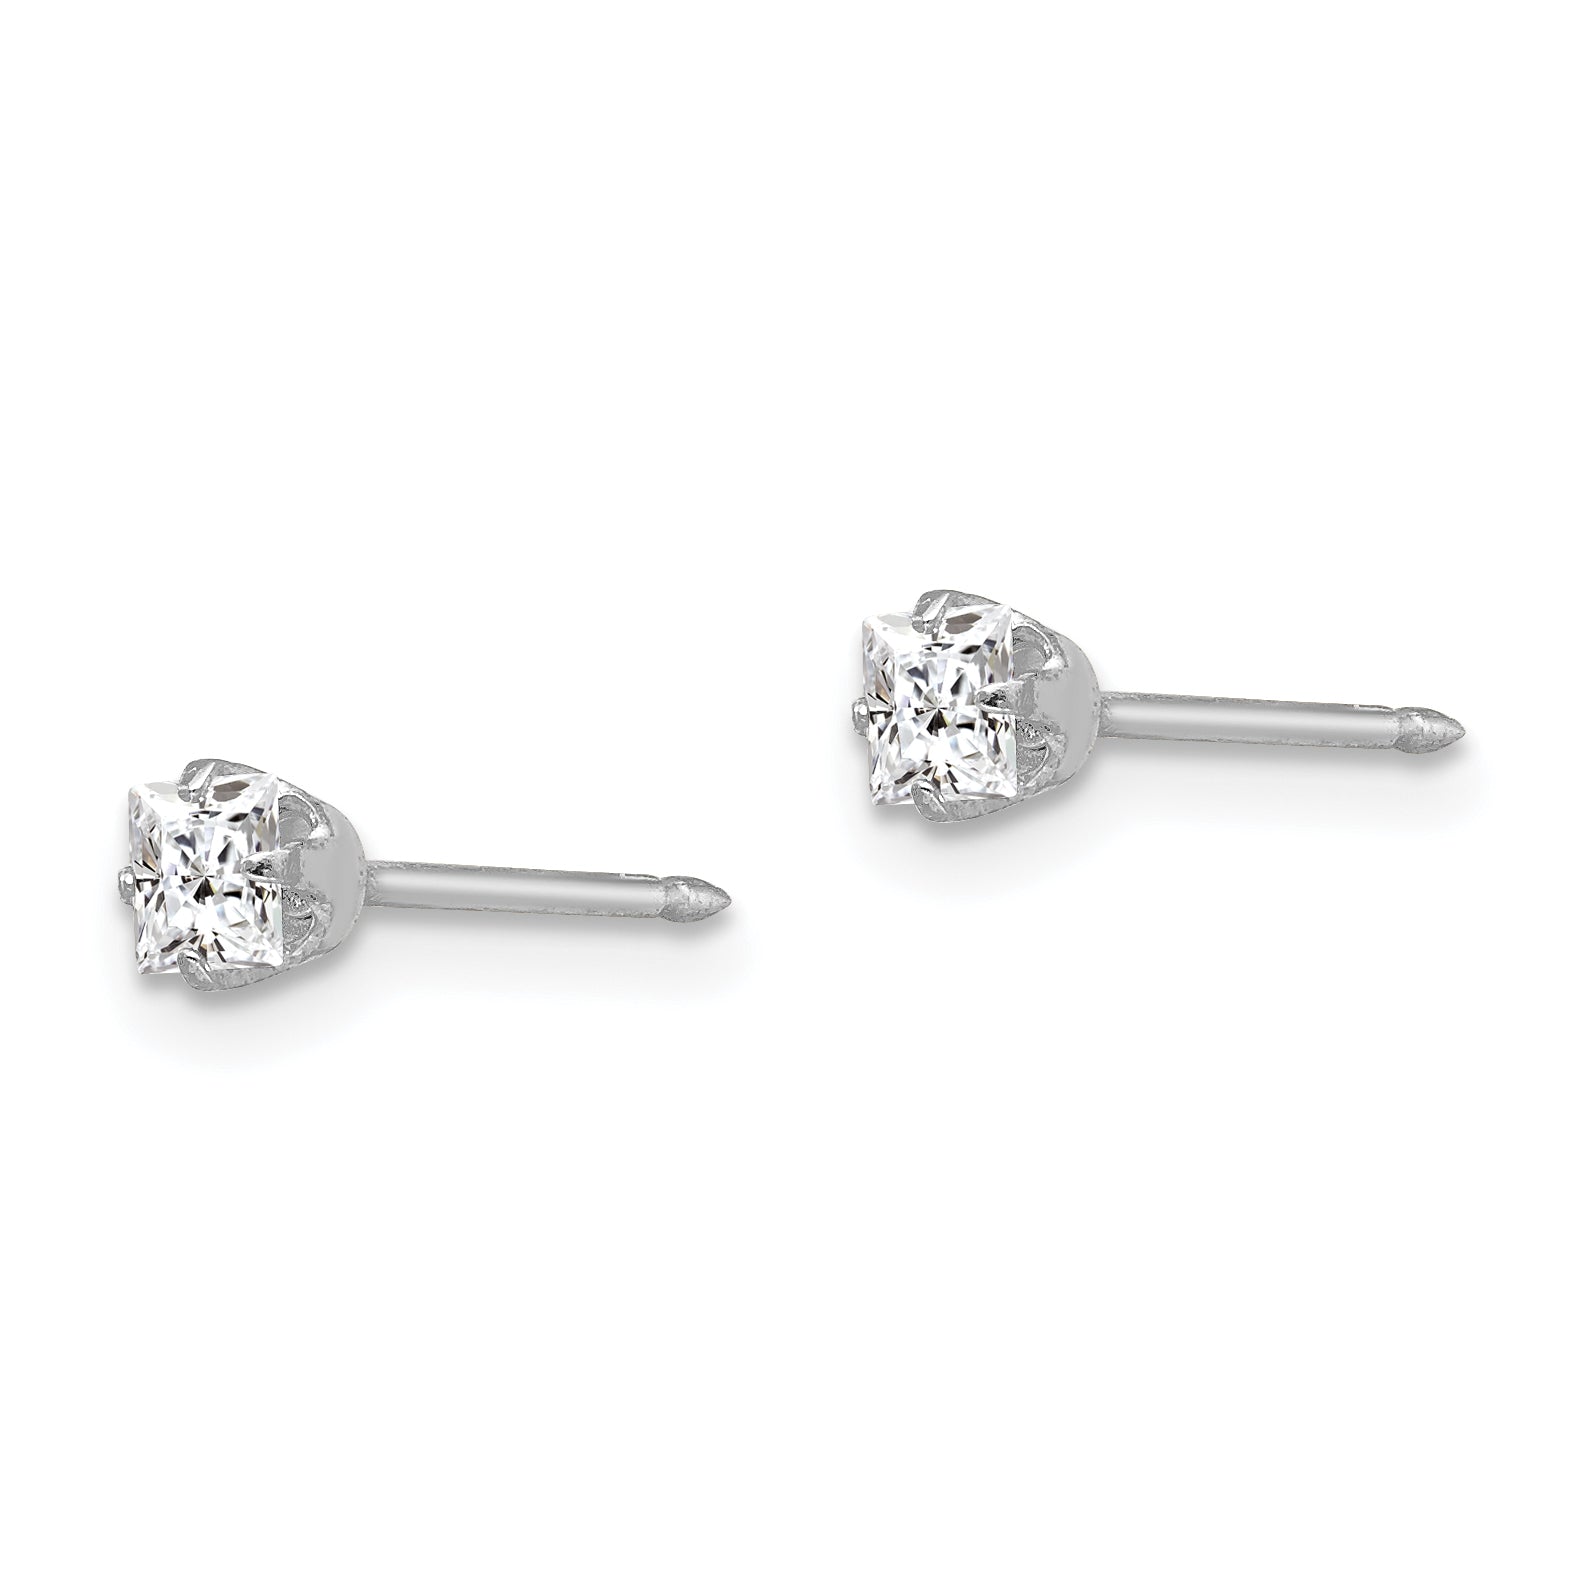 Inverness 18k White 3mm Square CZ Earrings